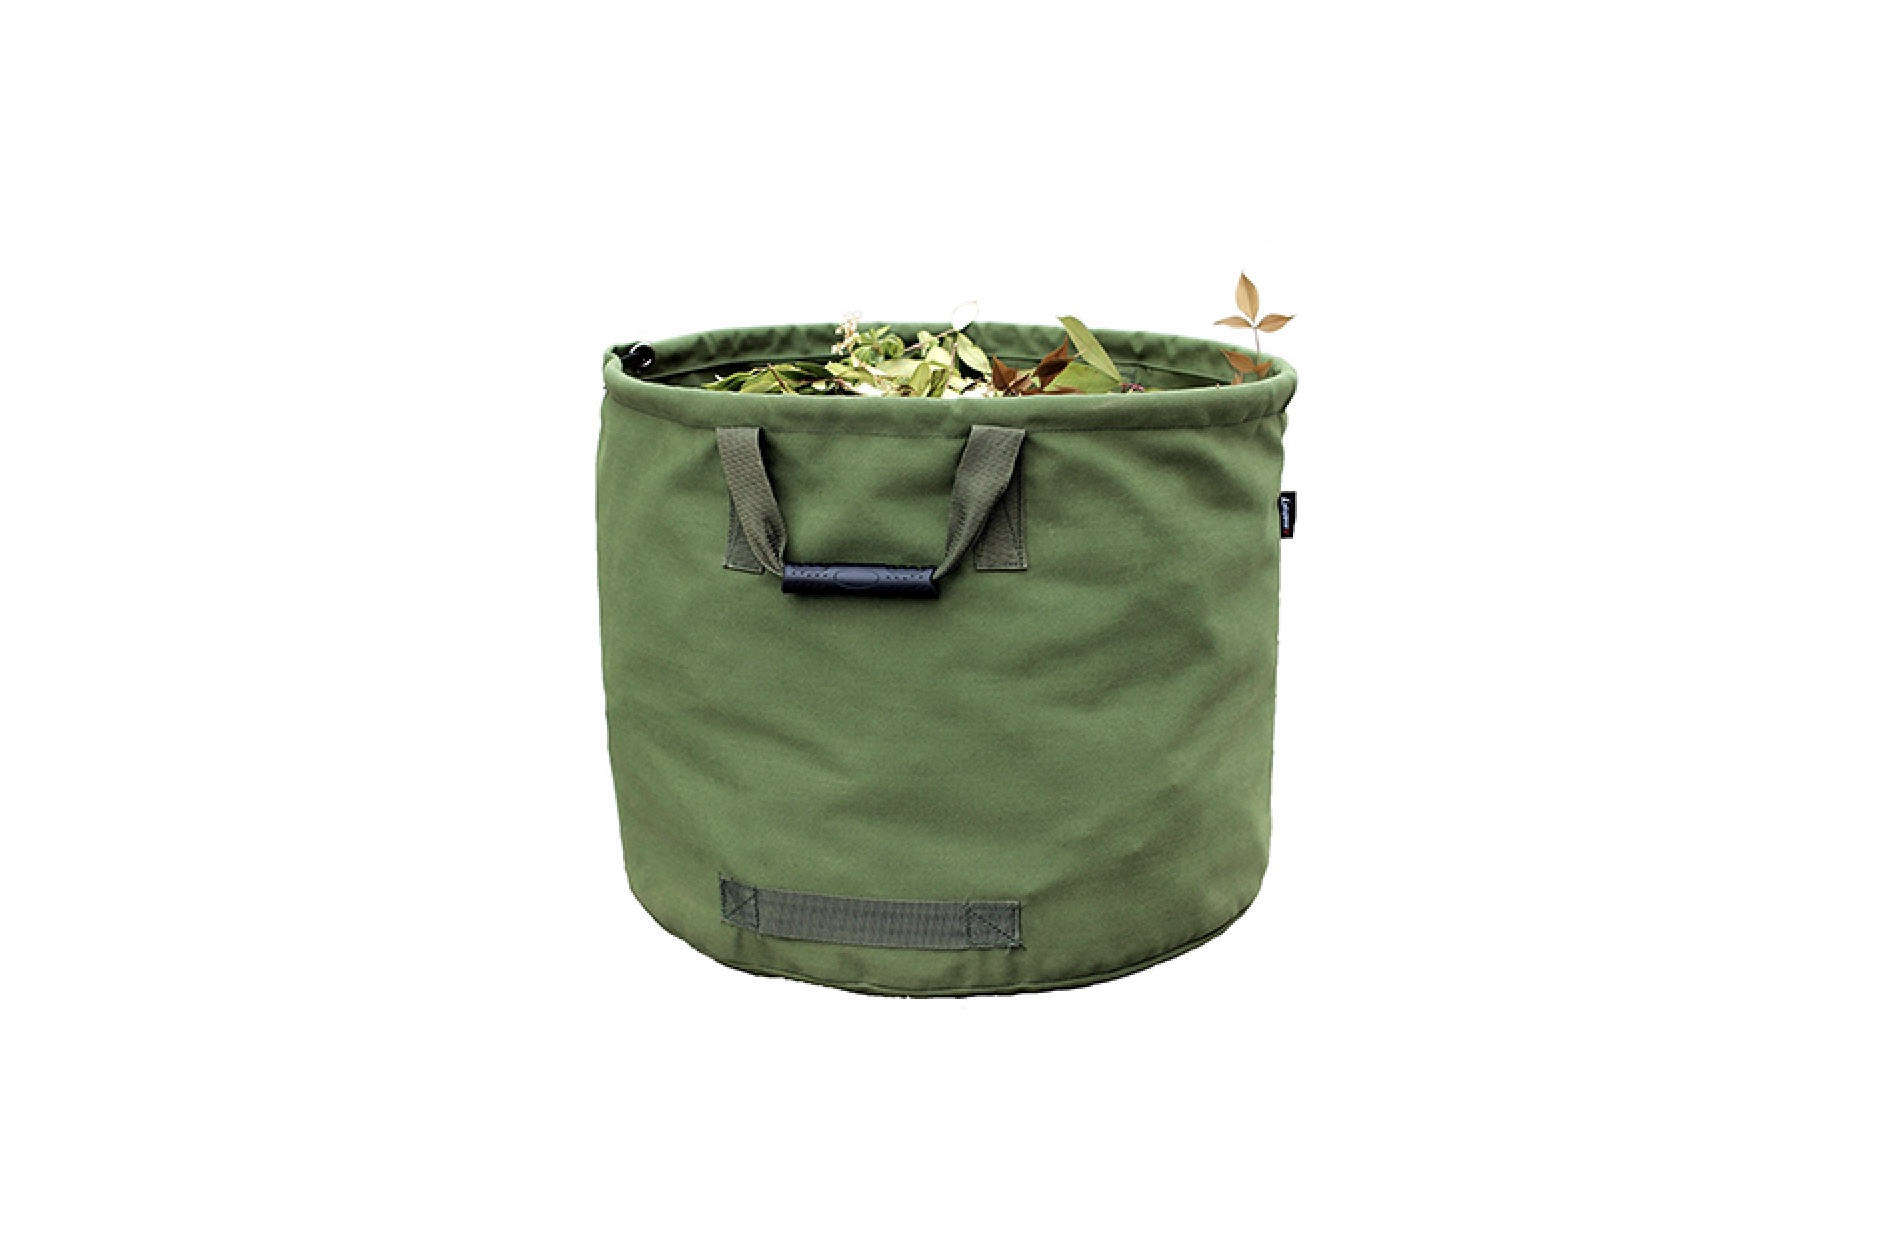 pinnacleT1 23 Gallon Garden Bag,Reusable Polyester Cloth Gardening Lawn and Leaf Bags,Collapsible Portable Yard Waste Bag with with Handle 